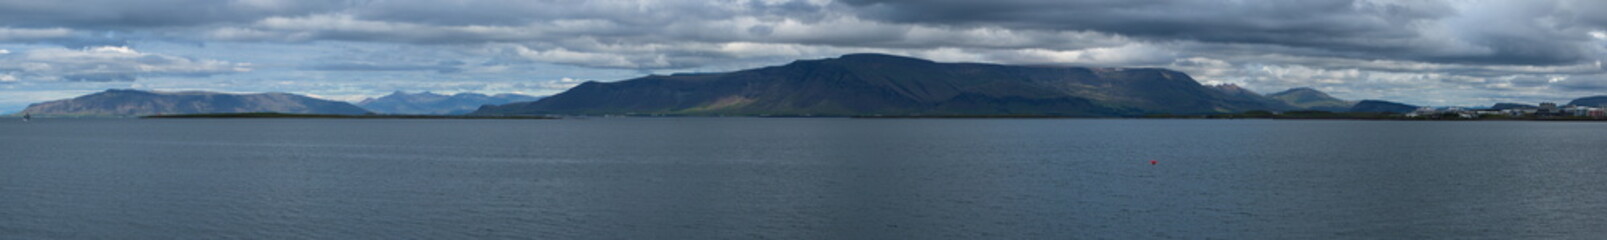 Mountain panoramic view from the harbour in Reykjavik, Iceland, Europe
